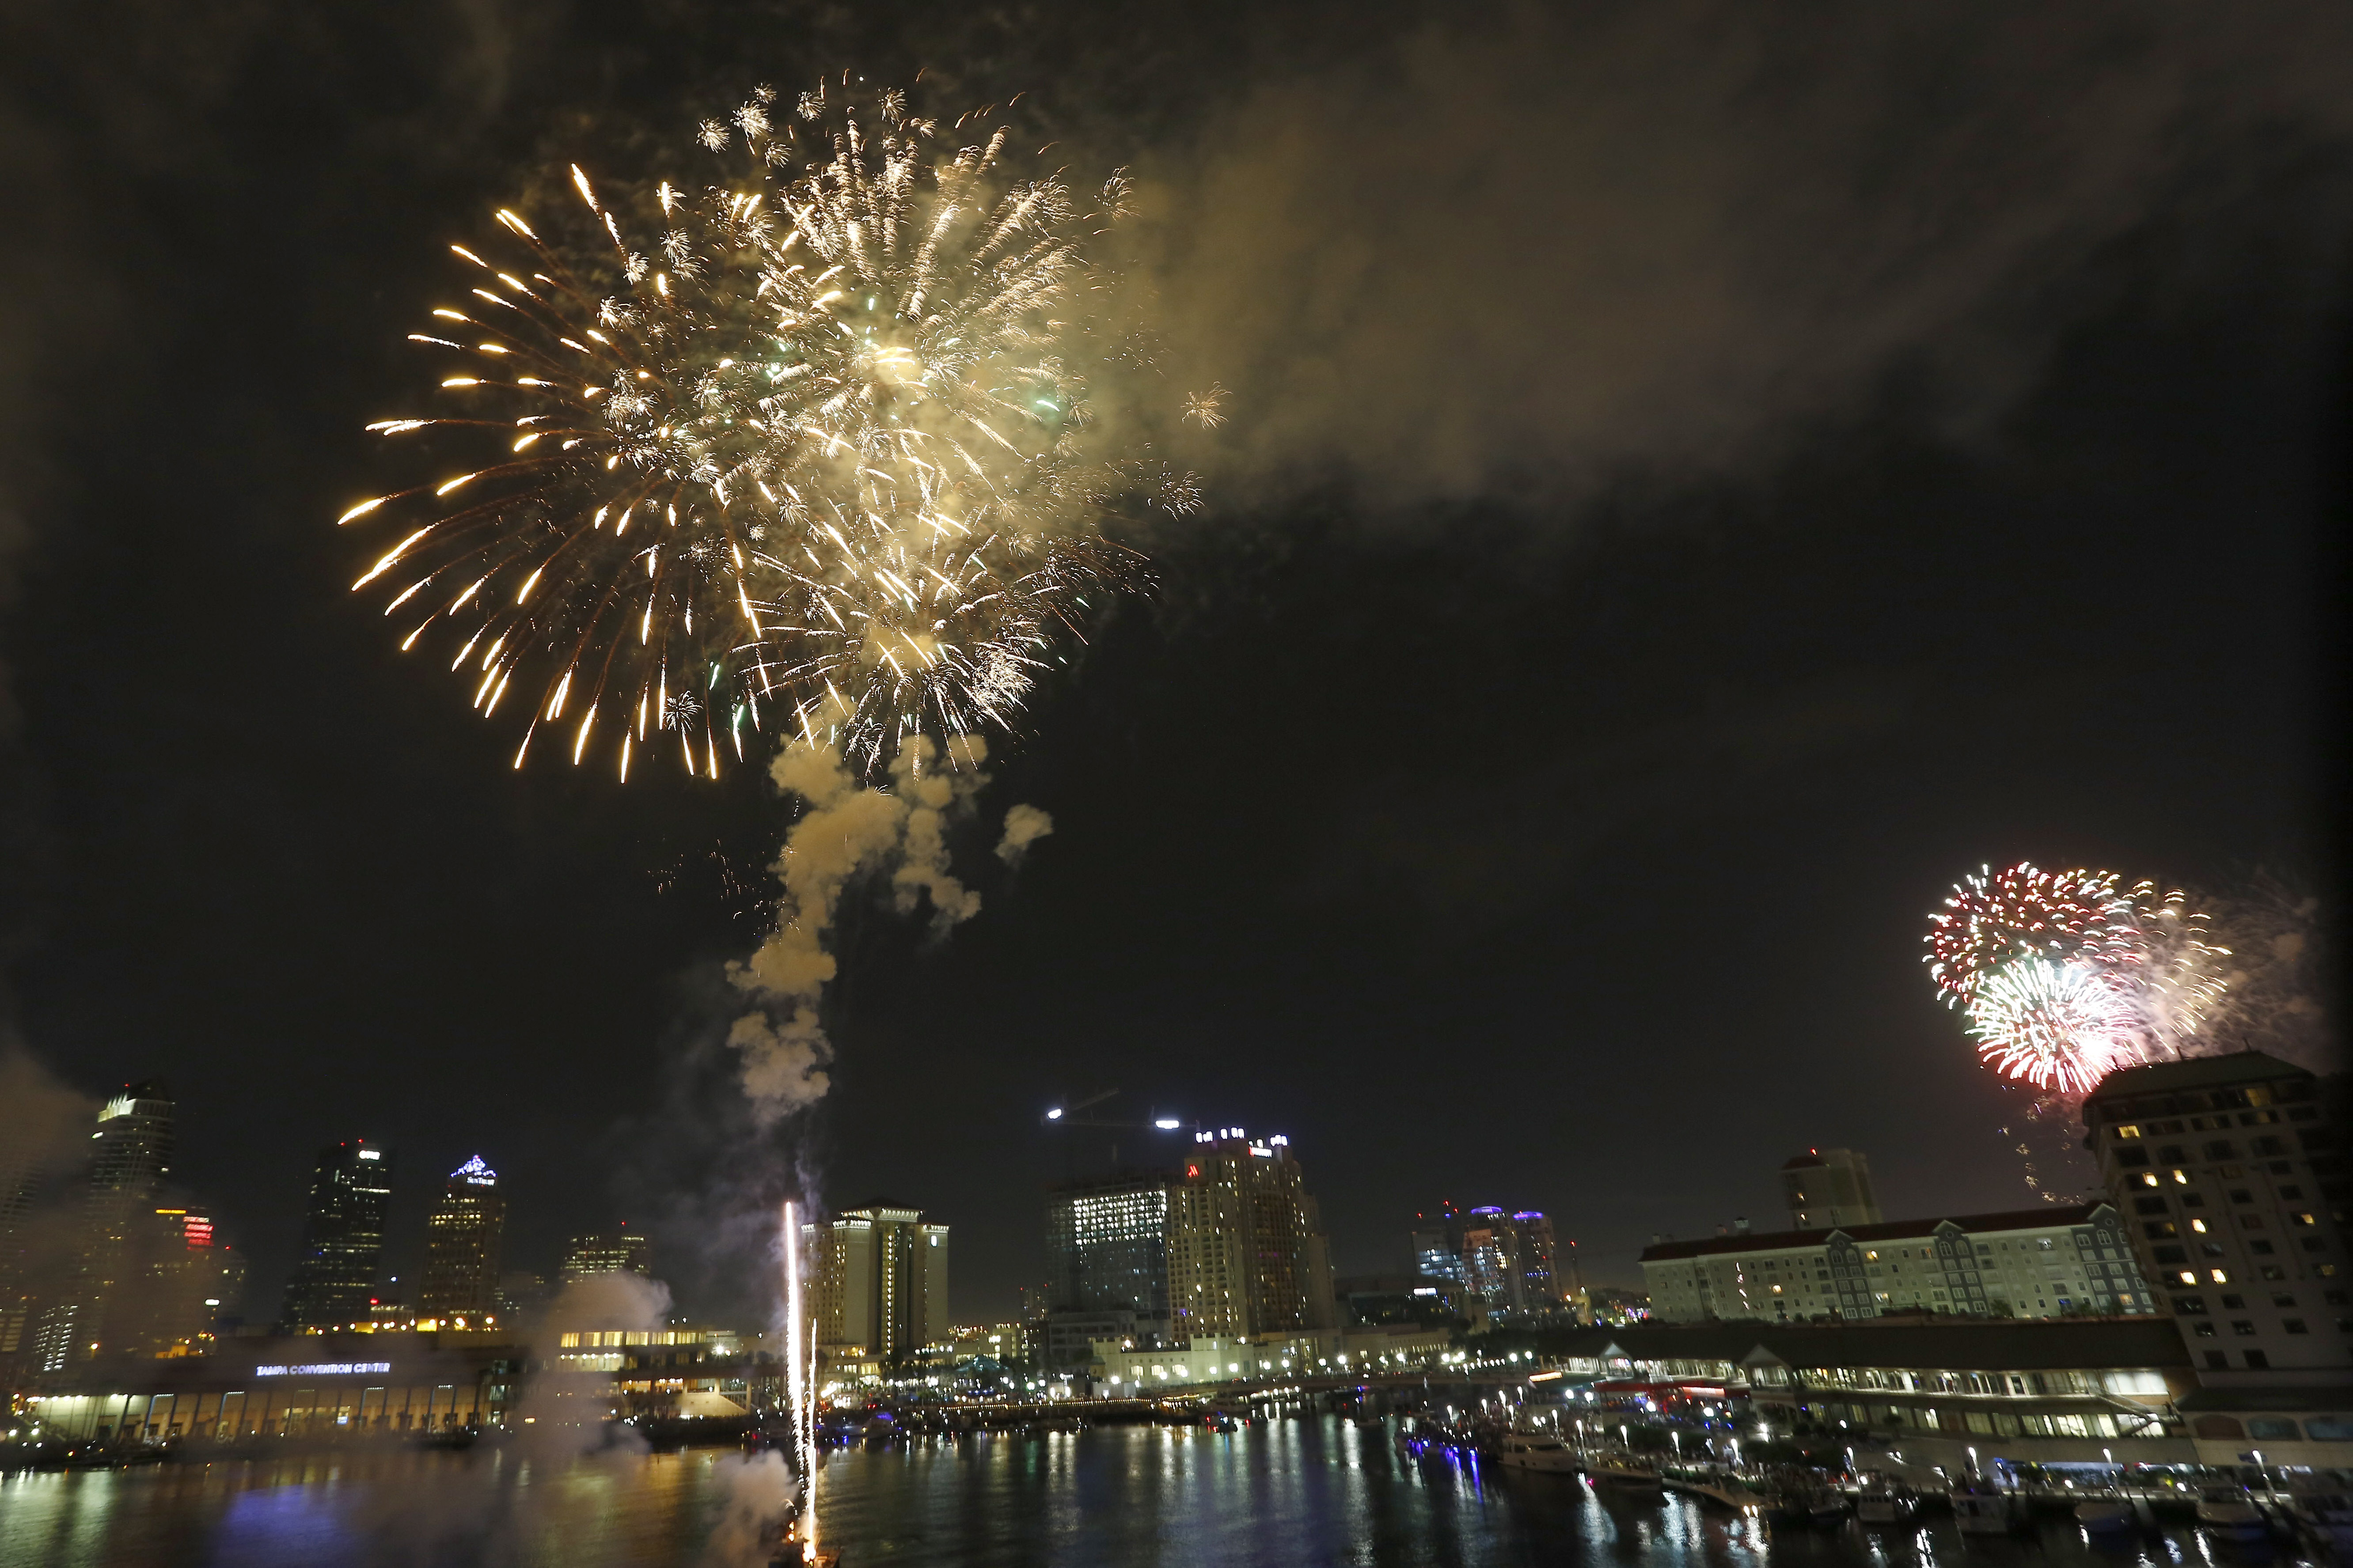 Hurricane Elsa won't spoil Independence Day fireworks in Tampa Bay